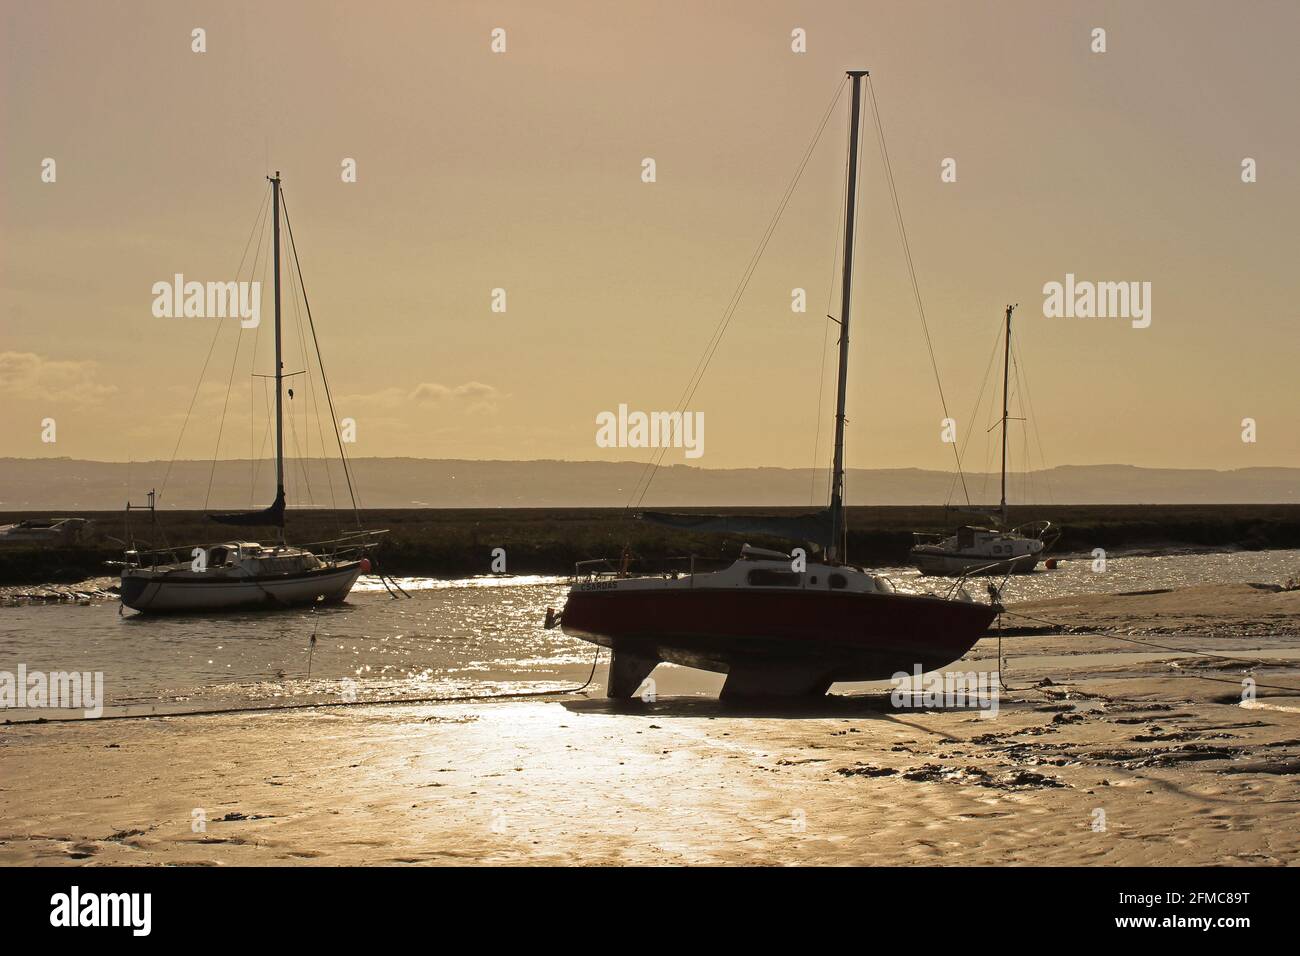 Yachts at Sunset on Heswall Shore, Wirral, Reino Unido Foto de stock